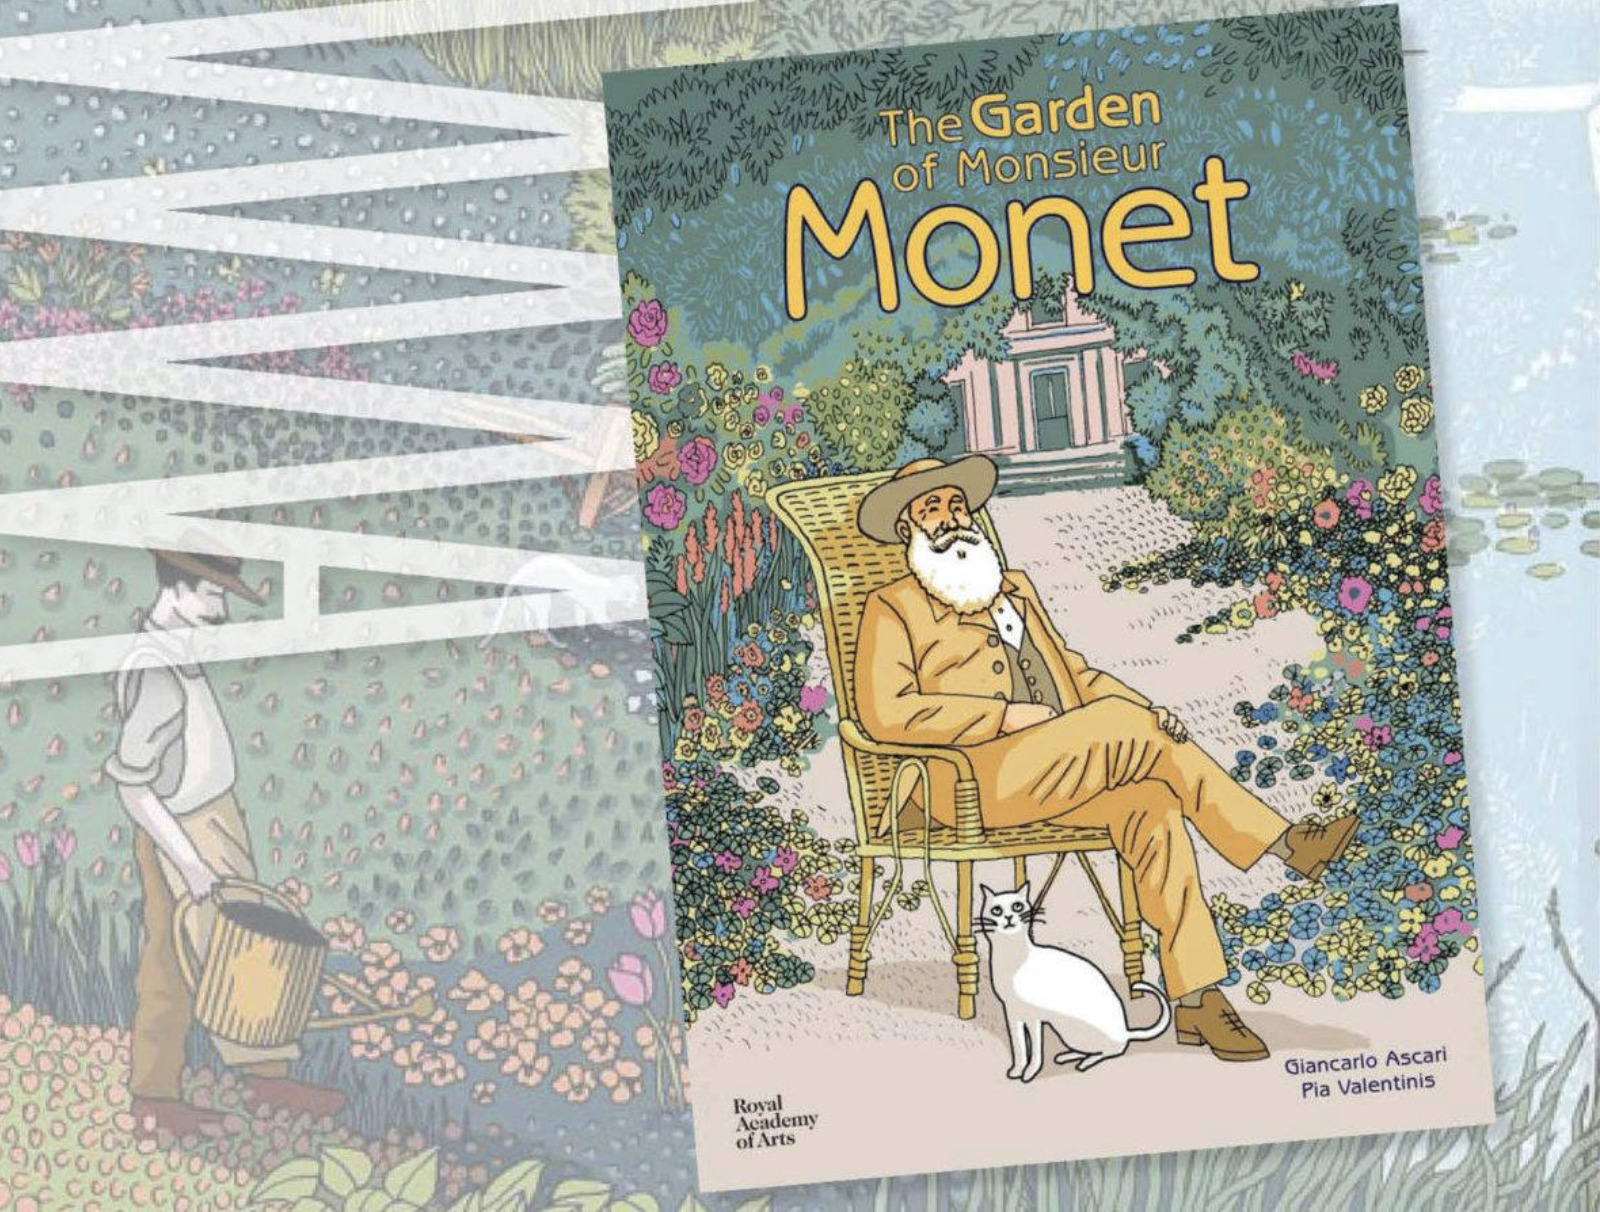 Look and Learn with Hoot: The Garden of Monsieur Monet